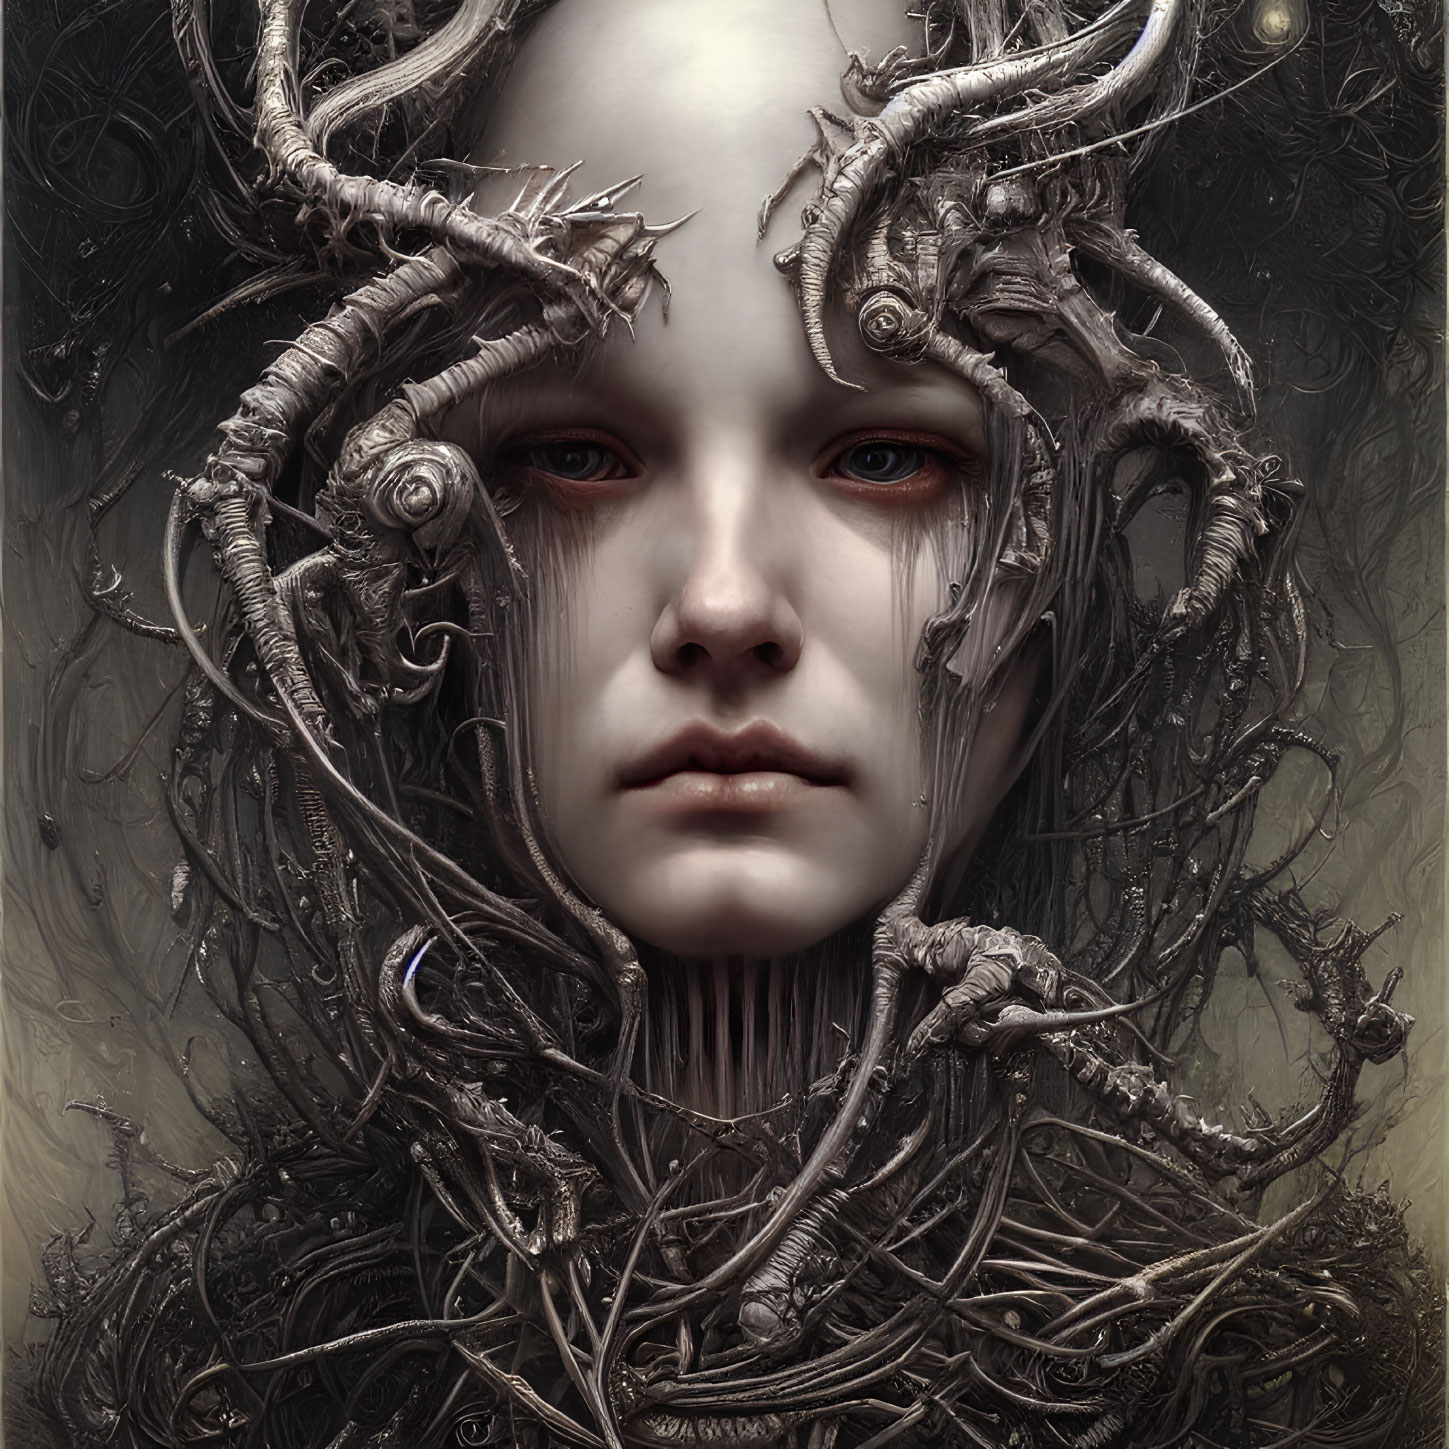 Pale figure with red eyes and antler-like branches in fantasy portrait